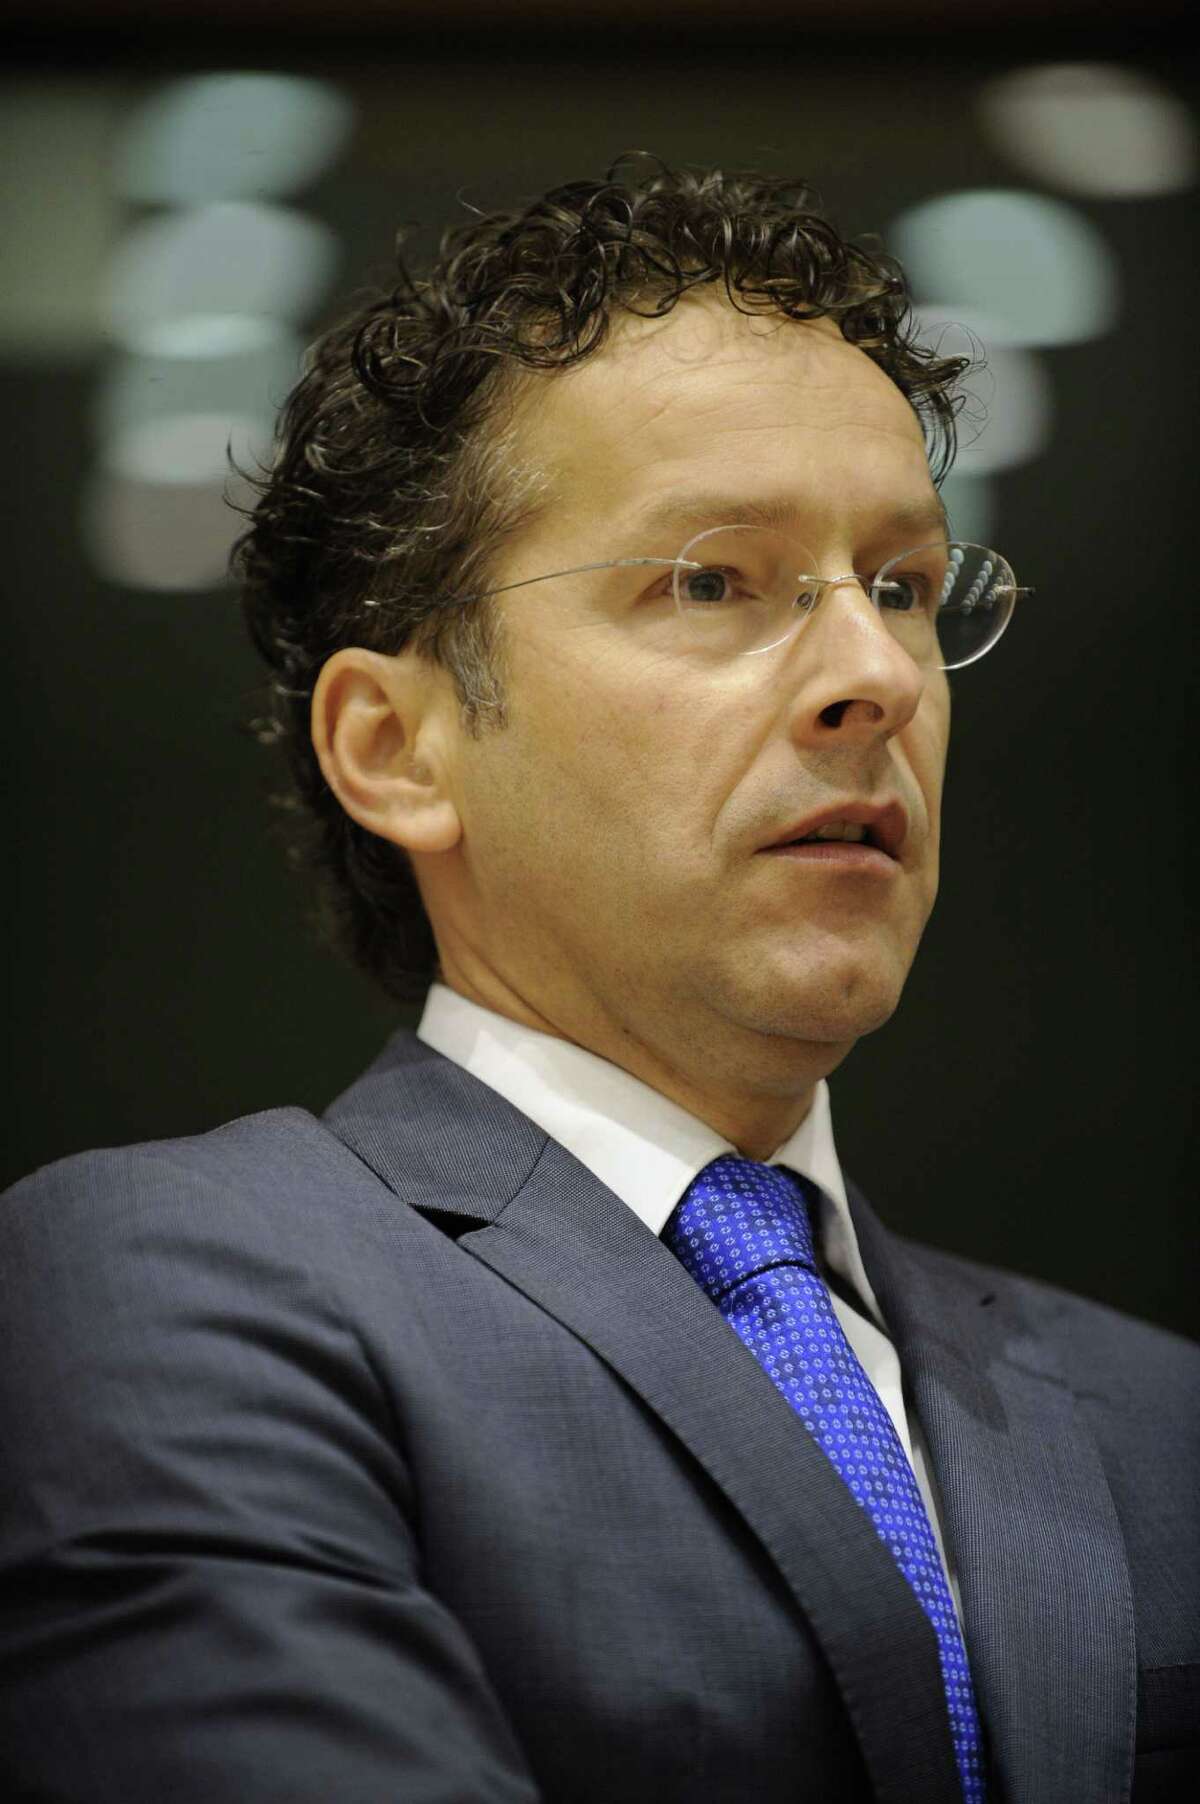 Dutch Minister of Finance and Eurogroup head Jeroen Dijsselbloem attends a meeting on September 5, 2013 at the EU Headquarters, in Brussels, where he discusses the latest developments in the Eurozone with members of the Economic and Monetary Affairs Committee. Twice-bailed out Greece will likely need more help, Dijsselbloem said Thursday, stressing that speculation about another reduction in its debt mountain was not helpful. AFP PHOTO/ JOHN THYSJOHN THYS/AFP/Getty Images